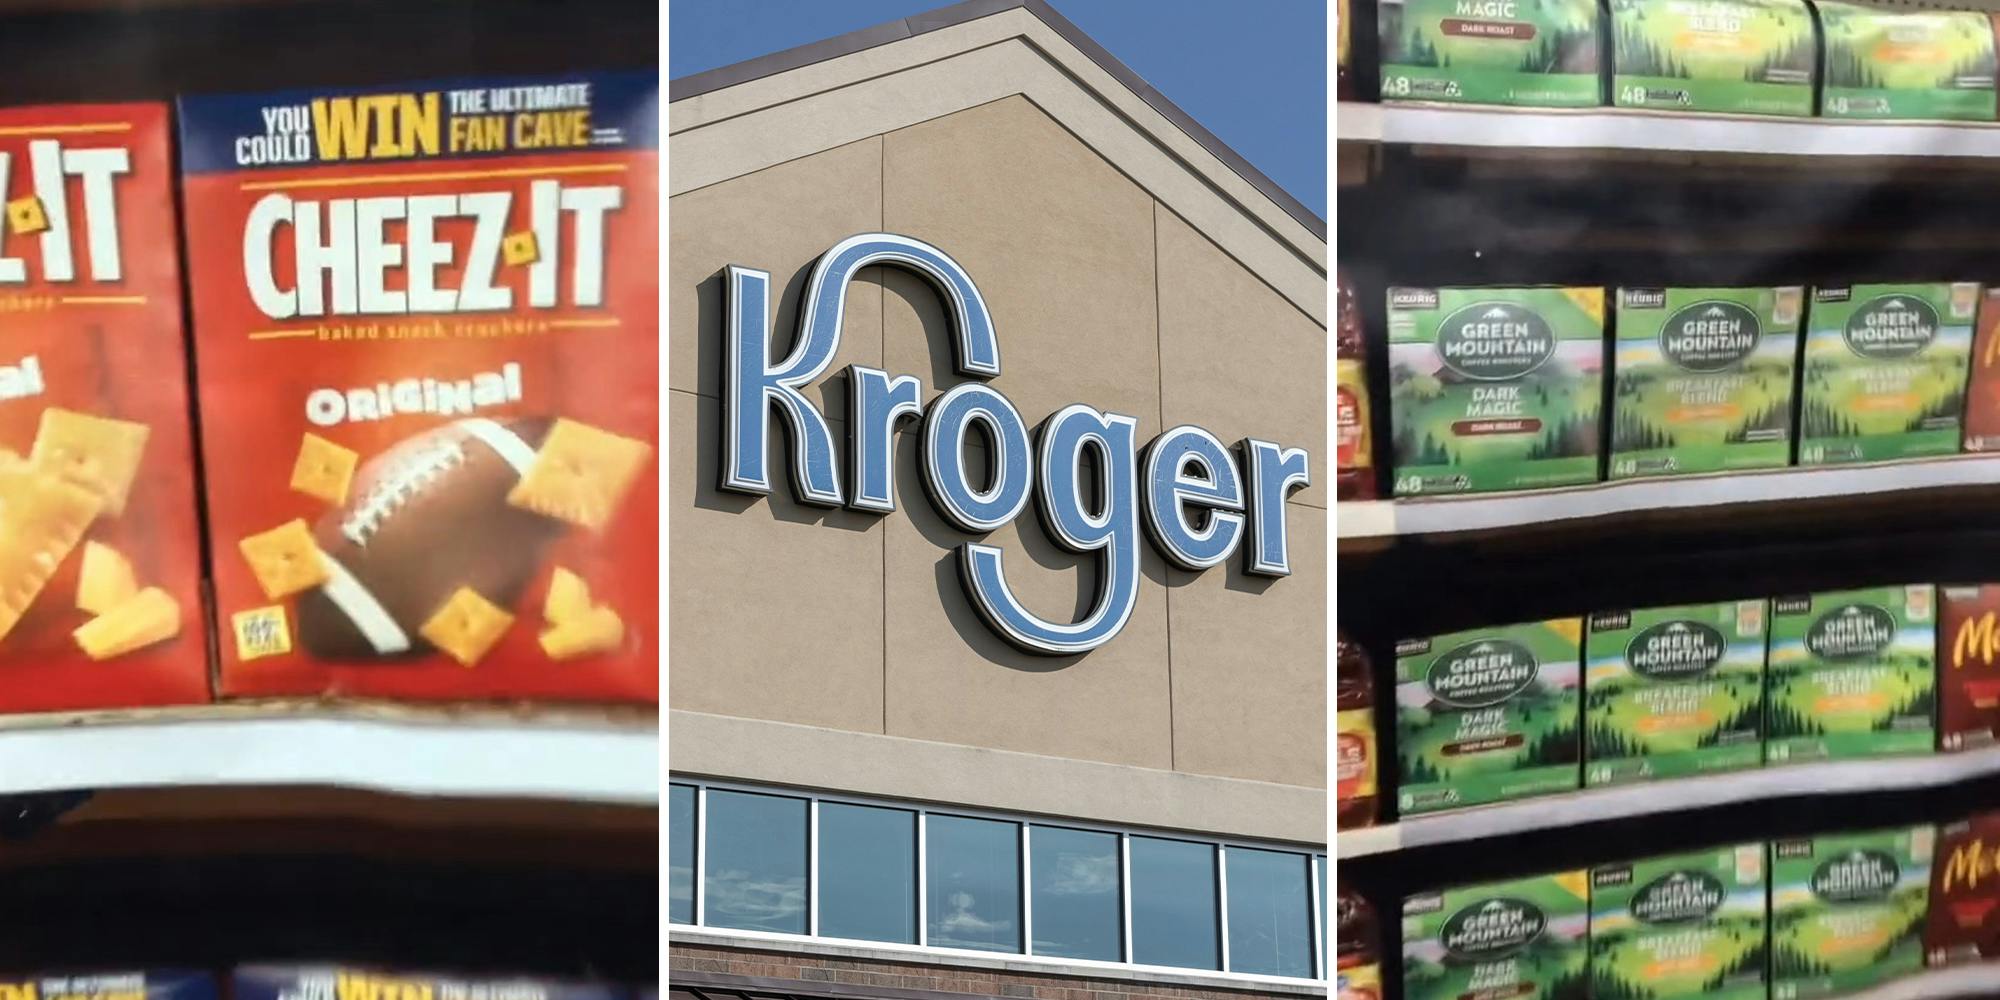 ‘We are definitely living in The Hunger Games’: Kroger shopper shows apple juice, Cheez-It shelves replaced by product photos